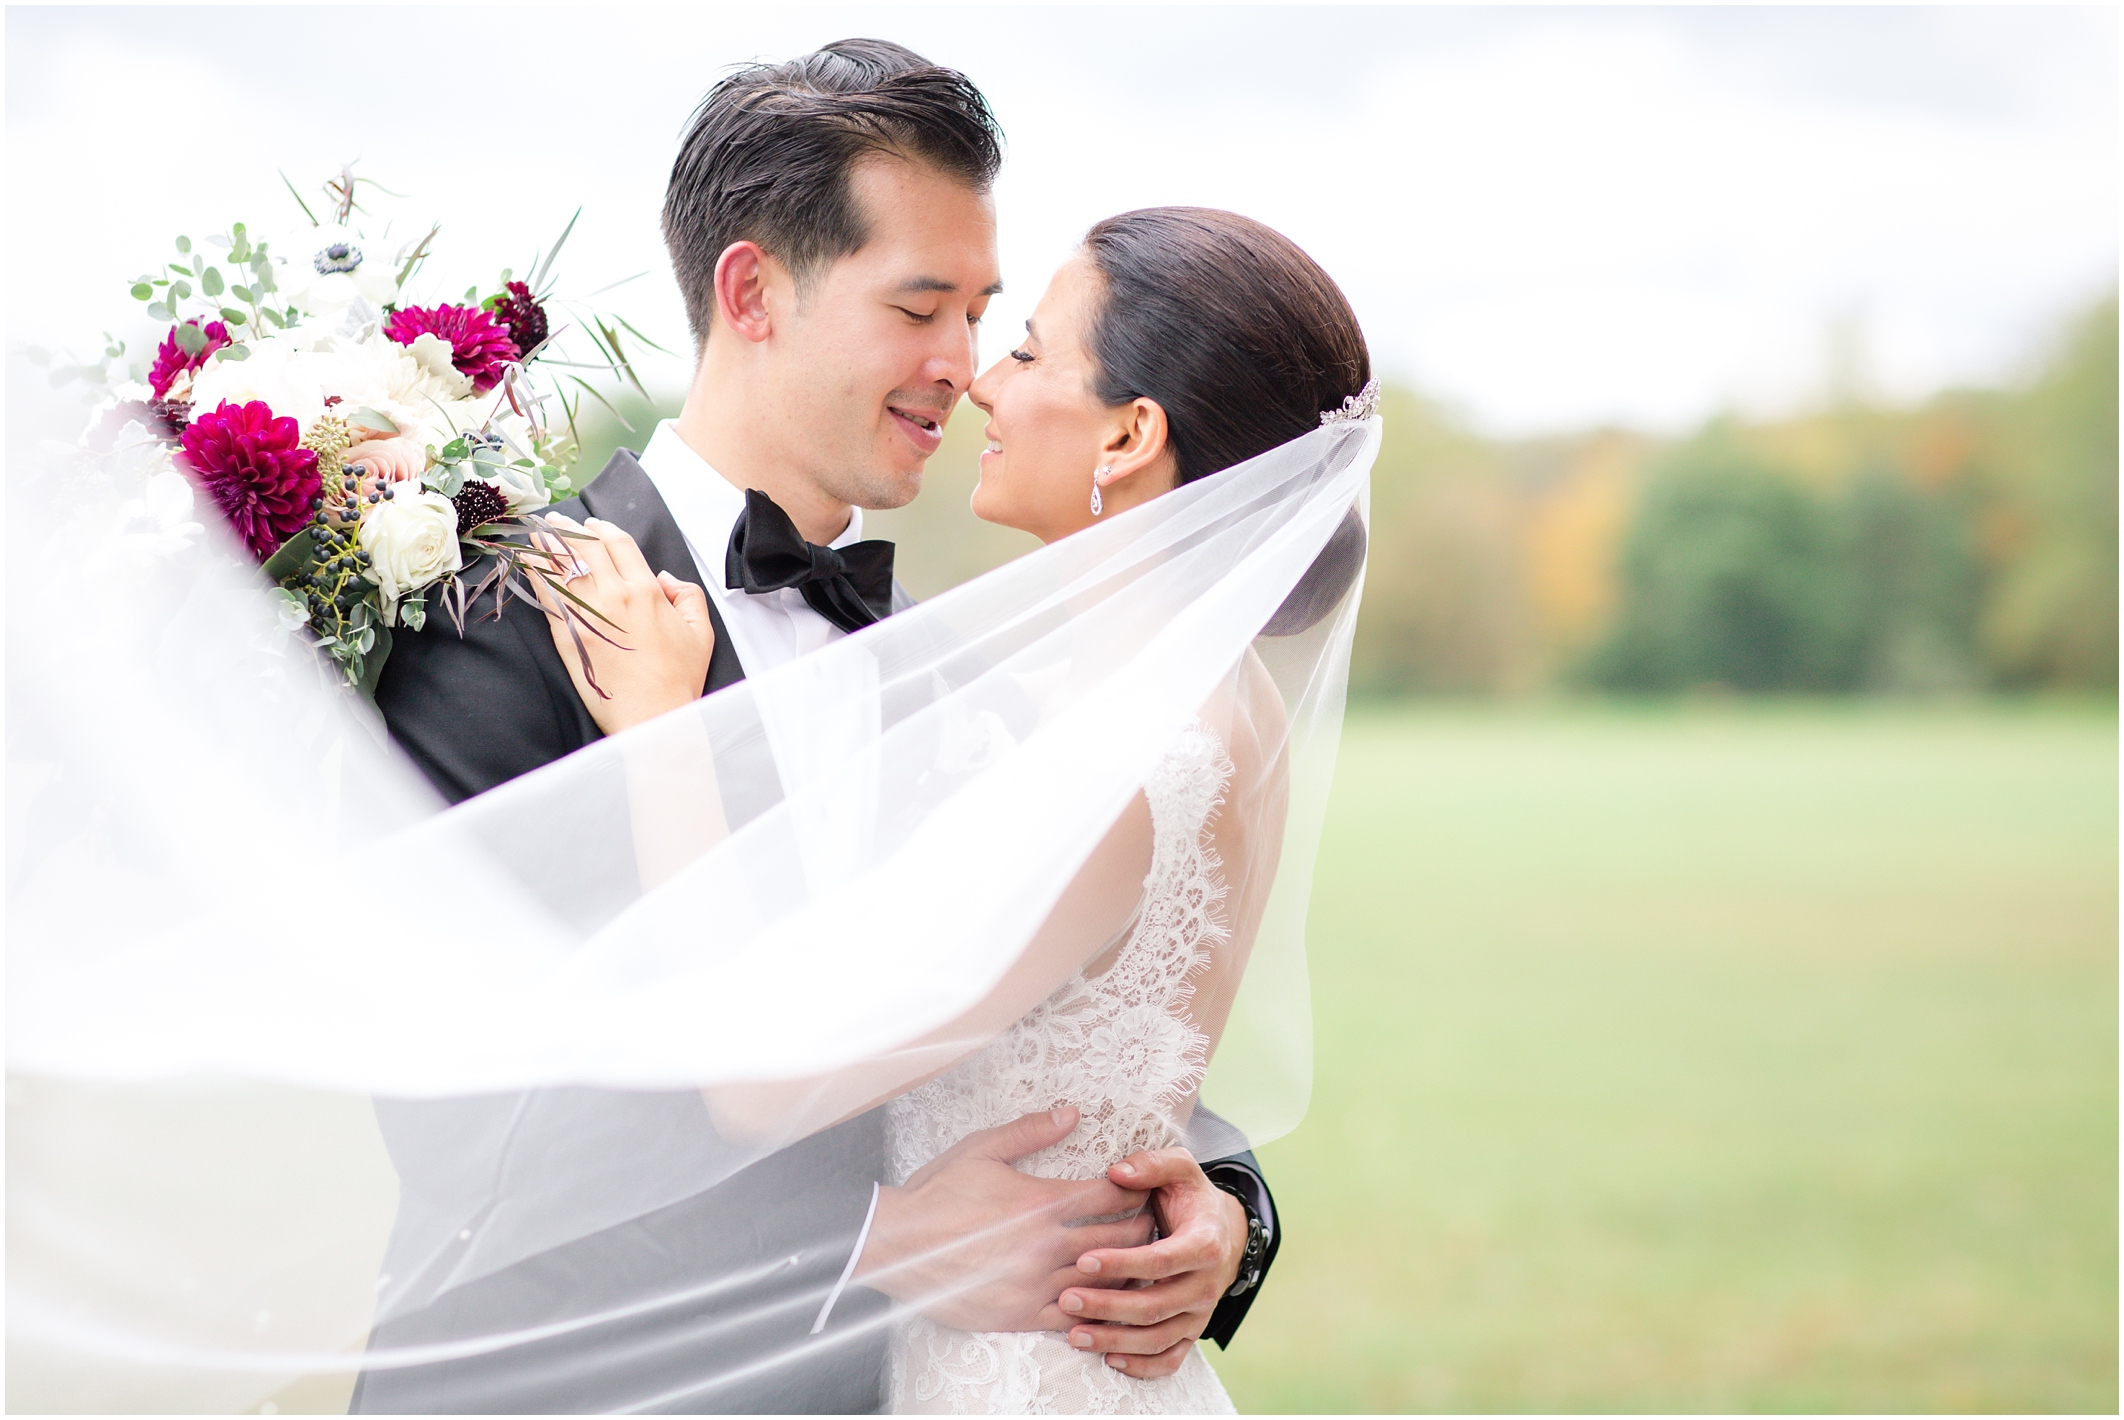 Rainy wedding day bride and groom portraits at Natirar Mansion in New Jersey